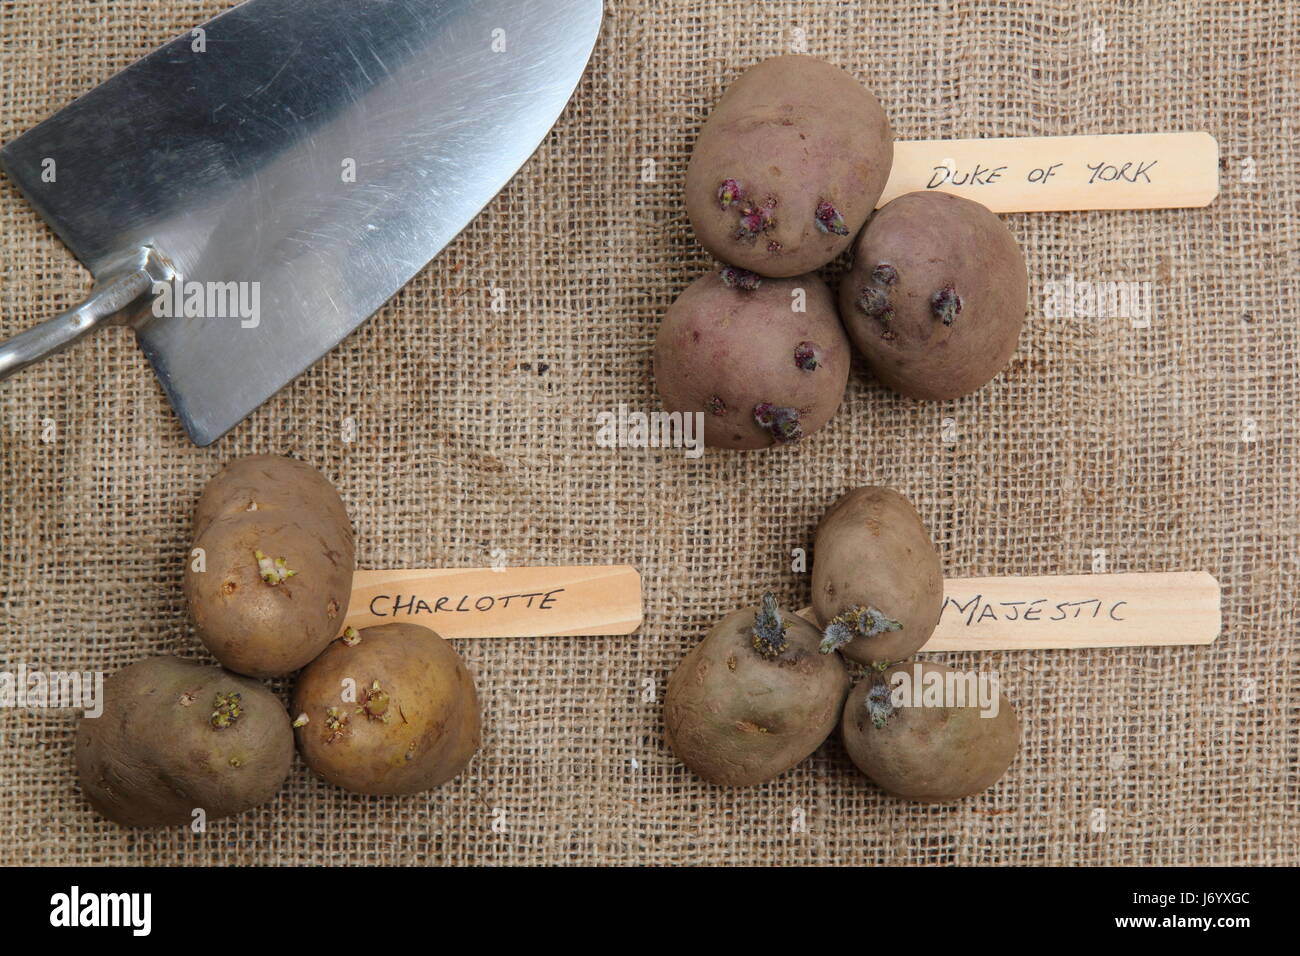 Varieties of seed potato (first early 'Red Duke of York'; second early, 'Charlotte' and main crop, 'Majestic') displayed on hessian background Stock Photo